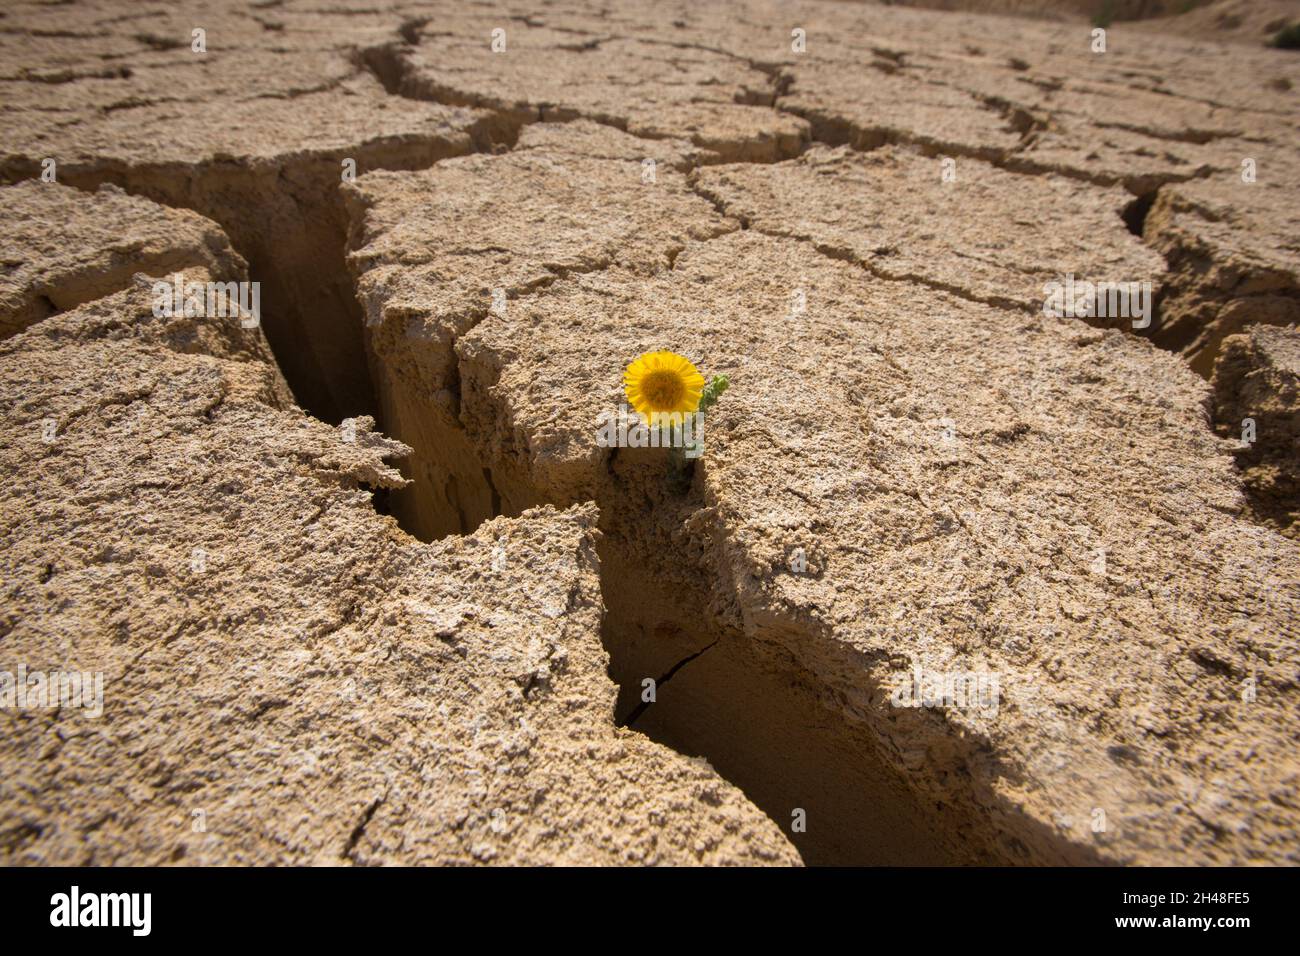 Eco concept of drought Flower grows out of dry cracked mud Stock Photo